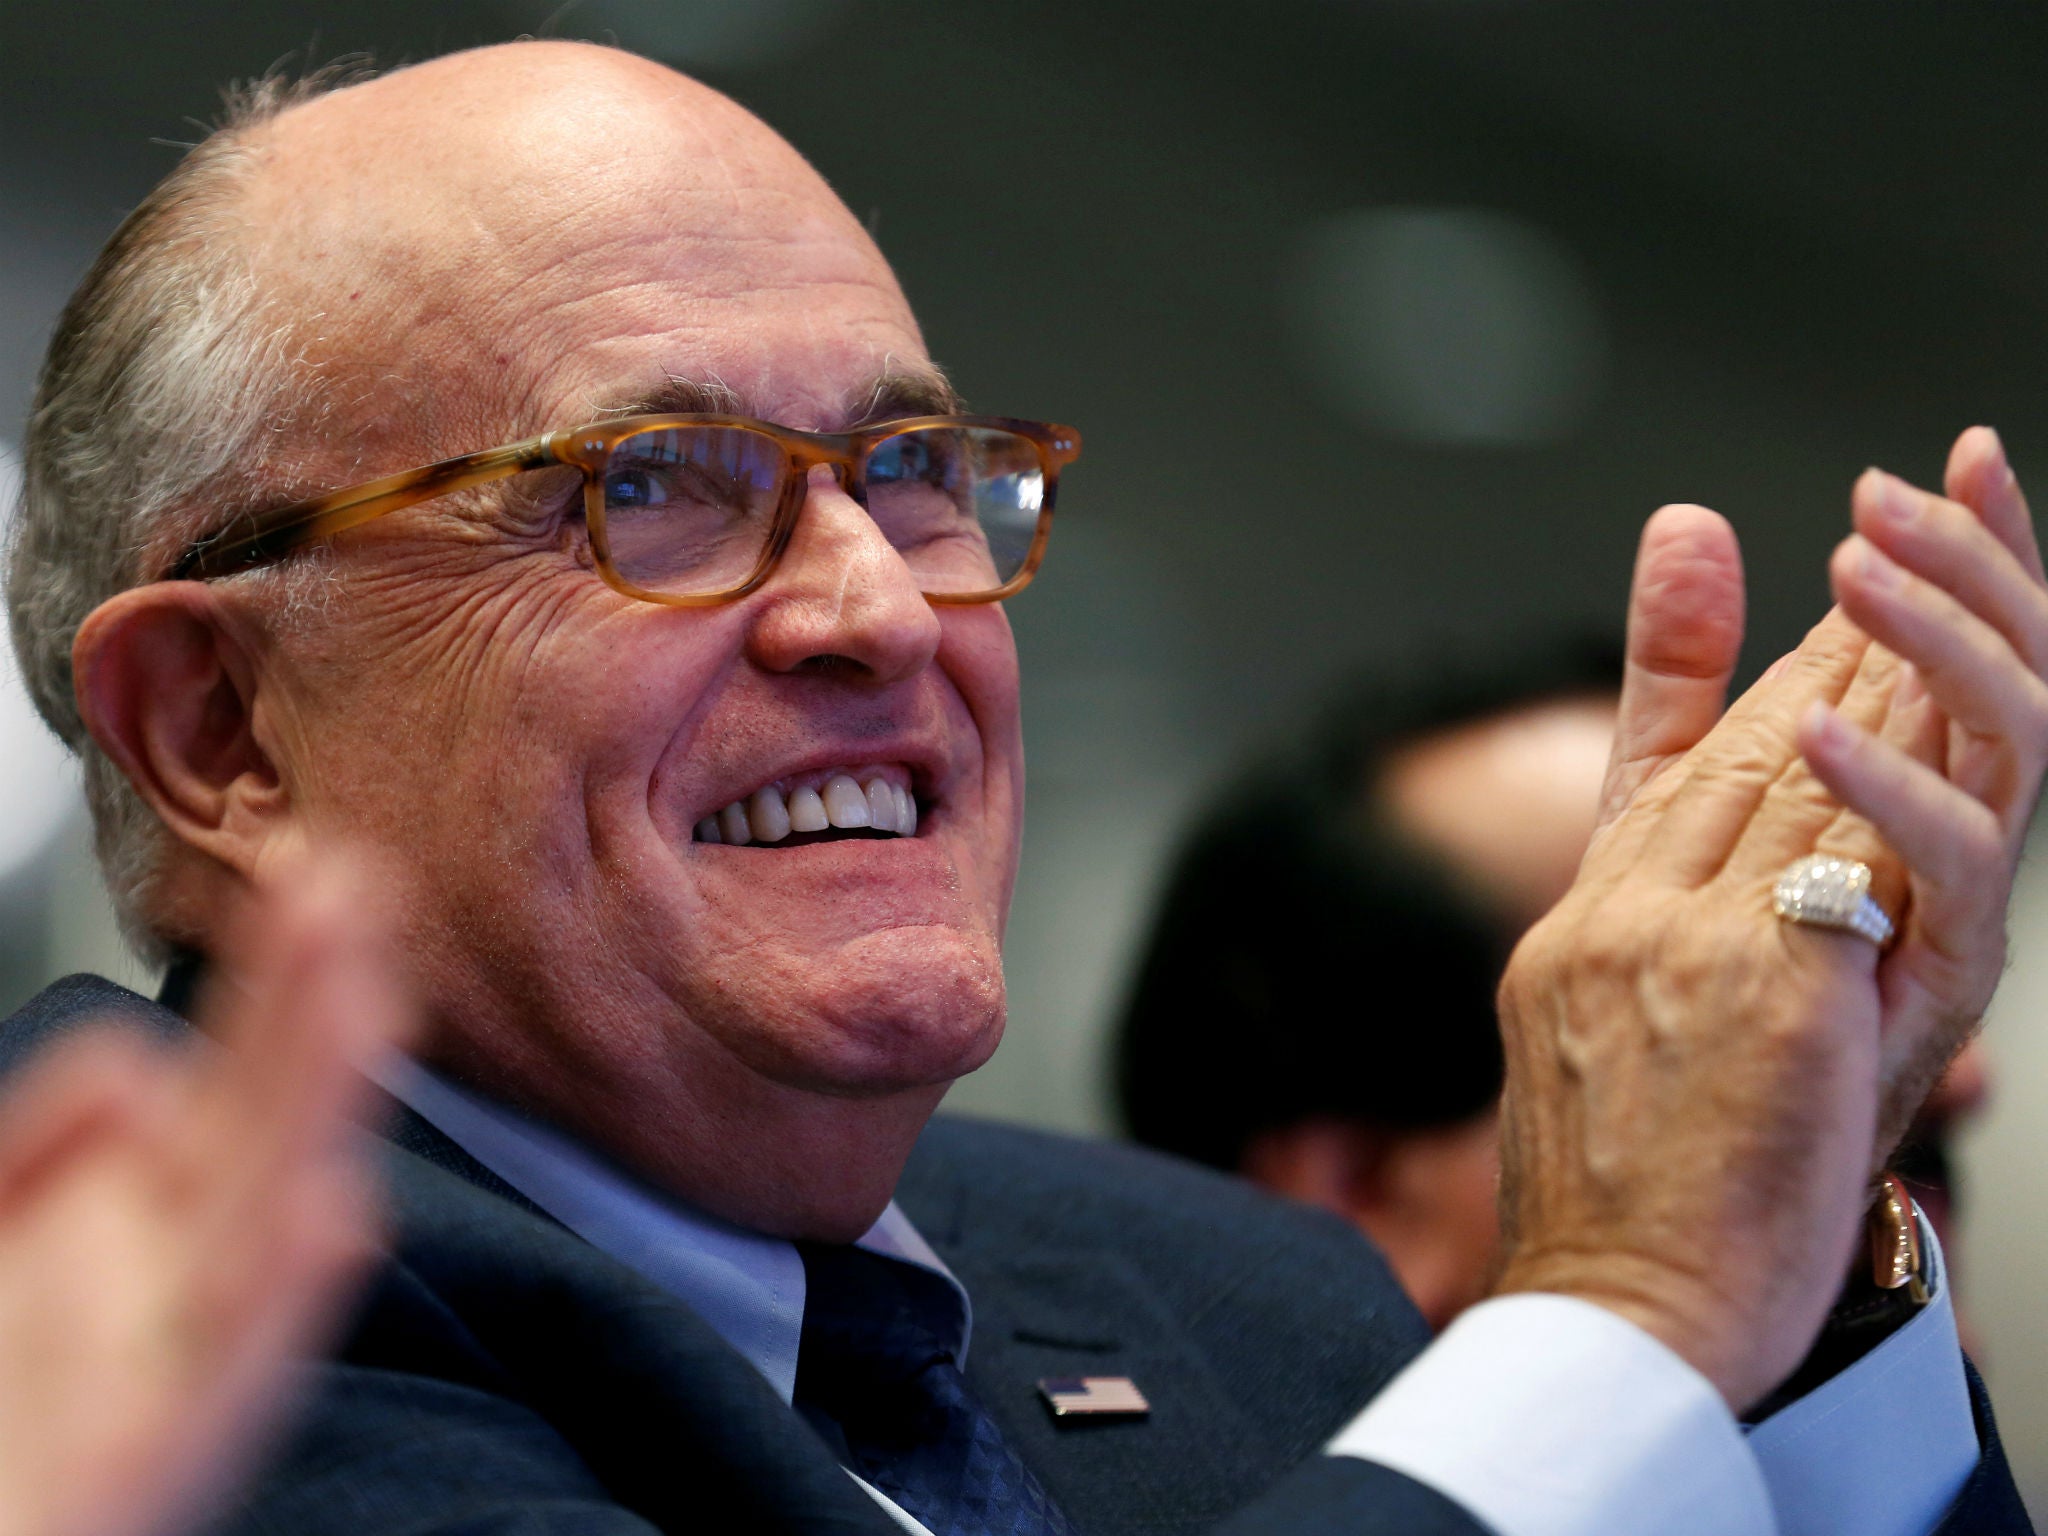 Former New York mayor and Trump campaign surrogate Rudy Giuliani recently joined the president's legal team